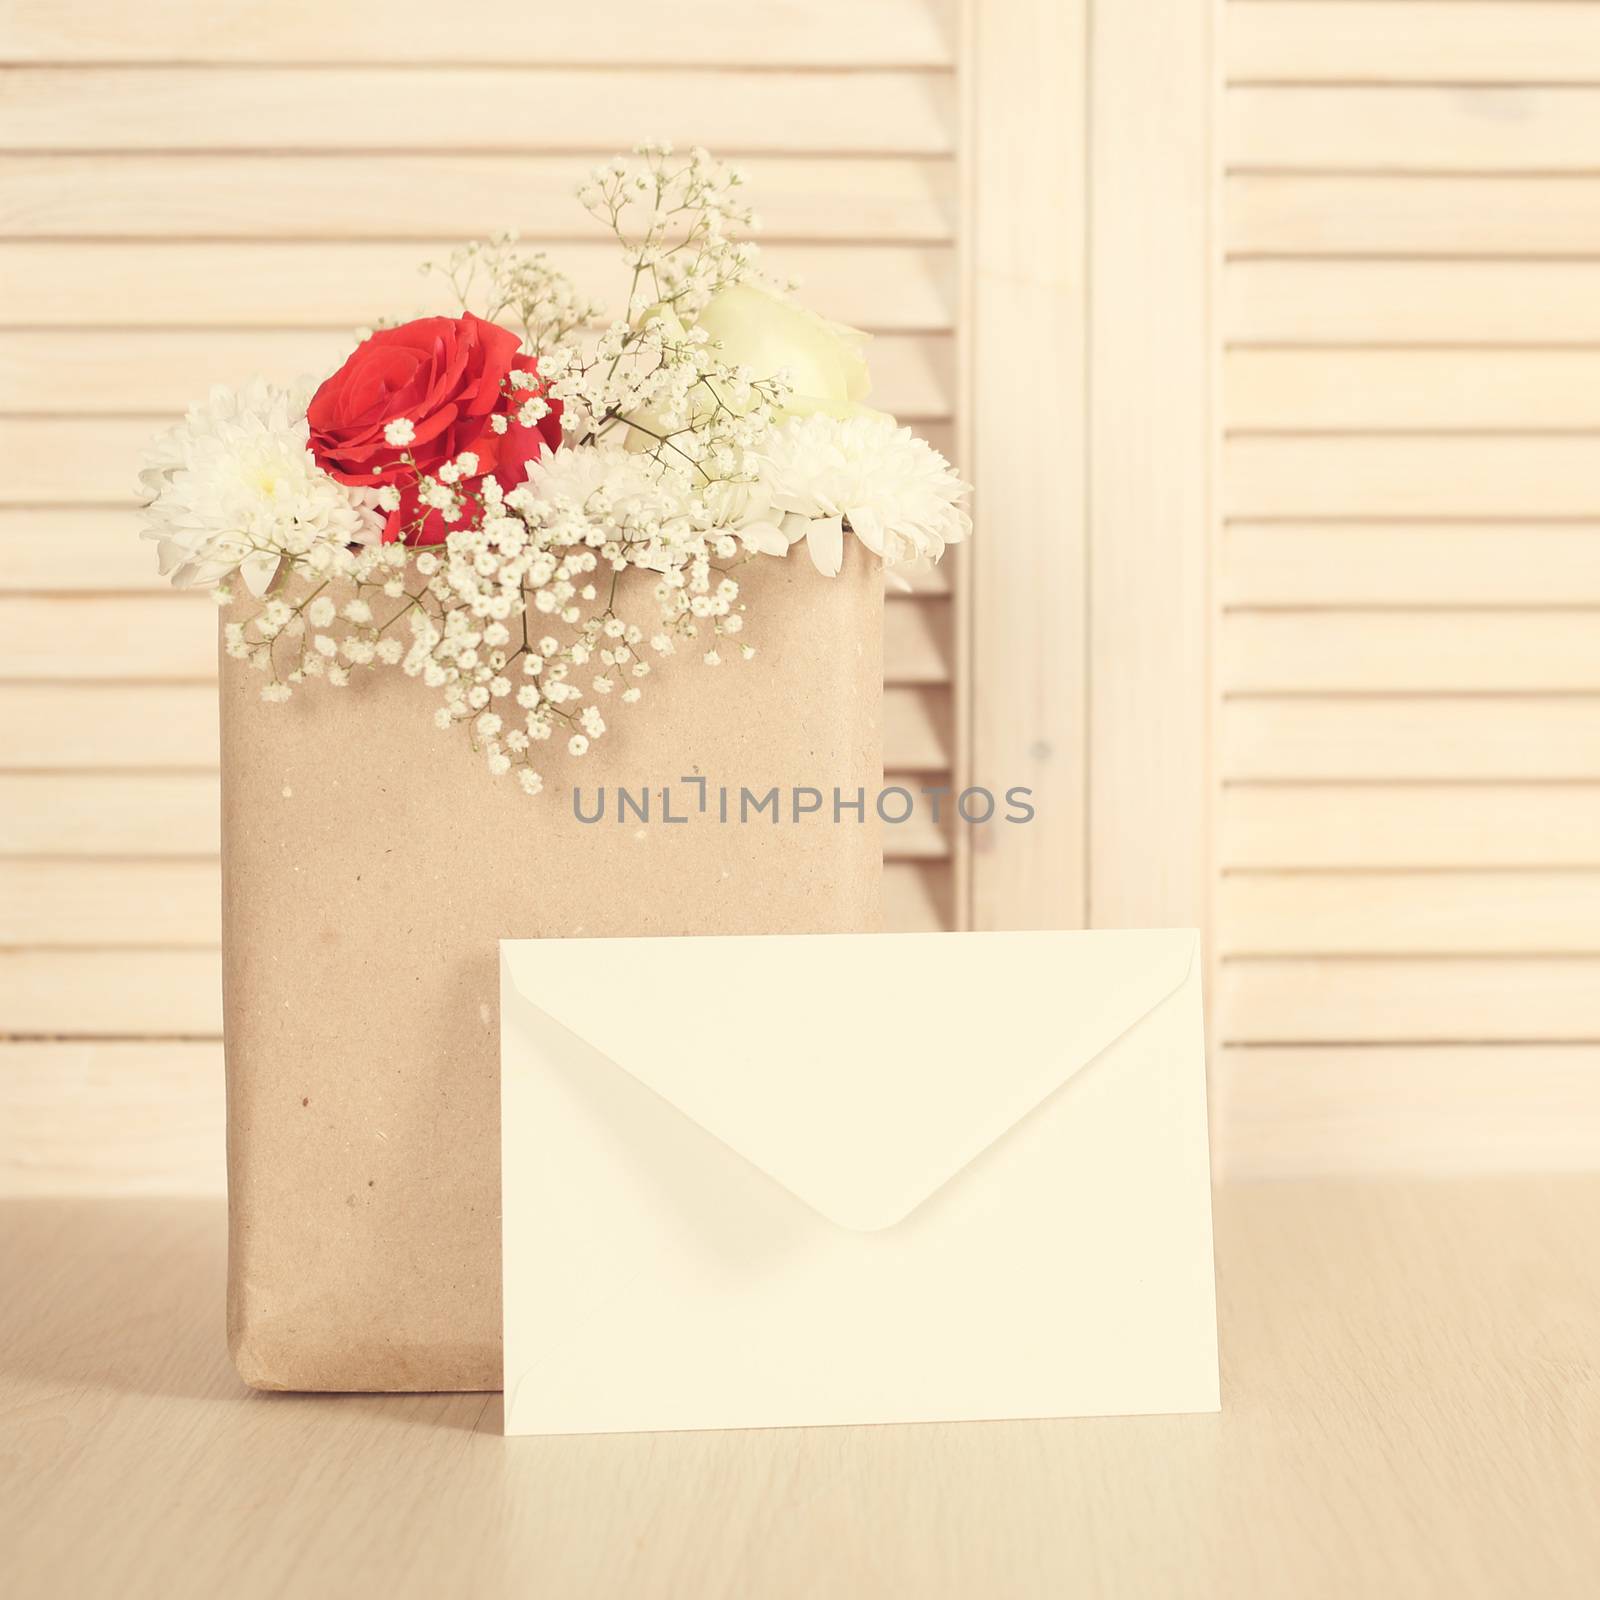 Flowers in paper bag and greeting envelope on wooden background